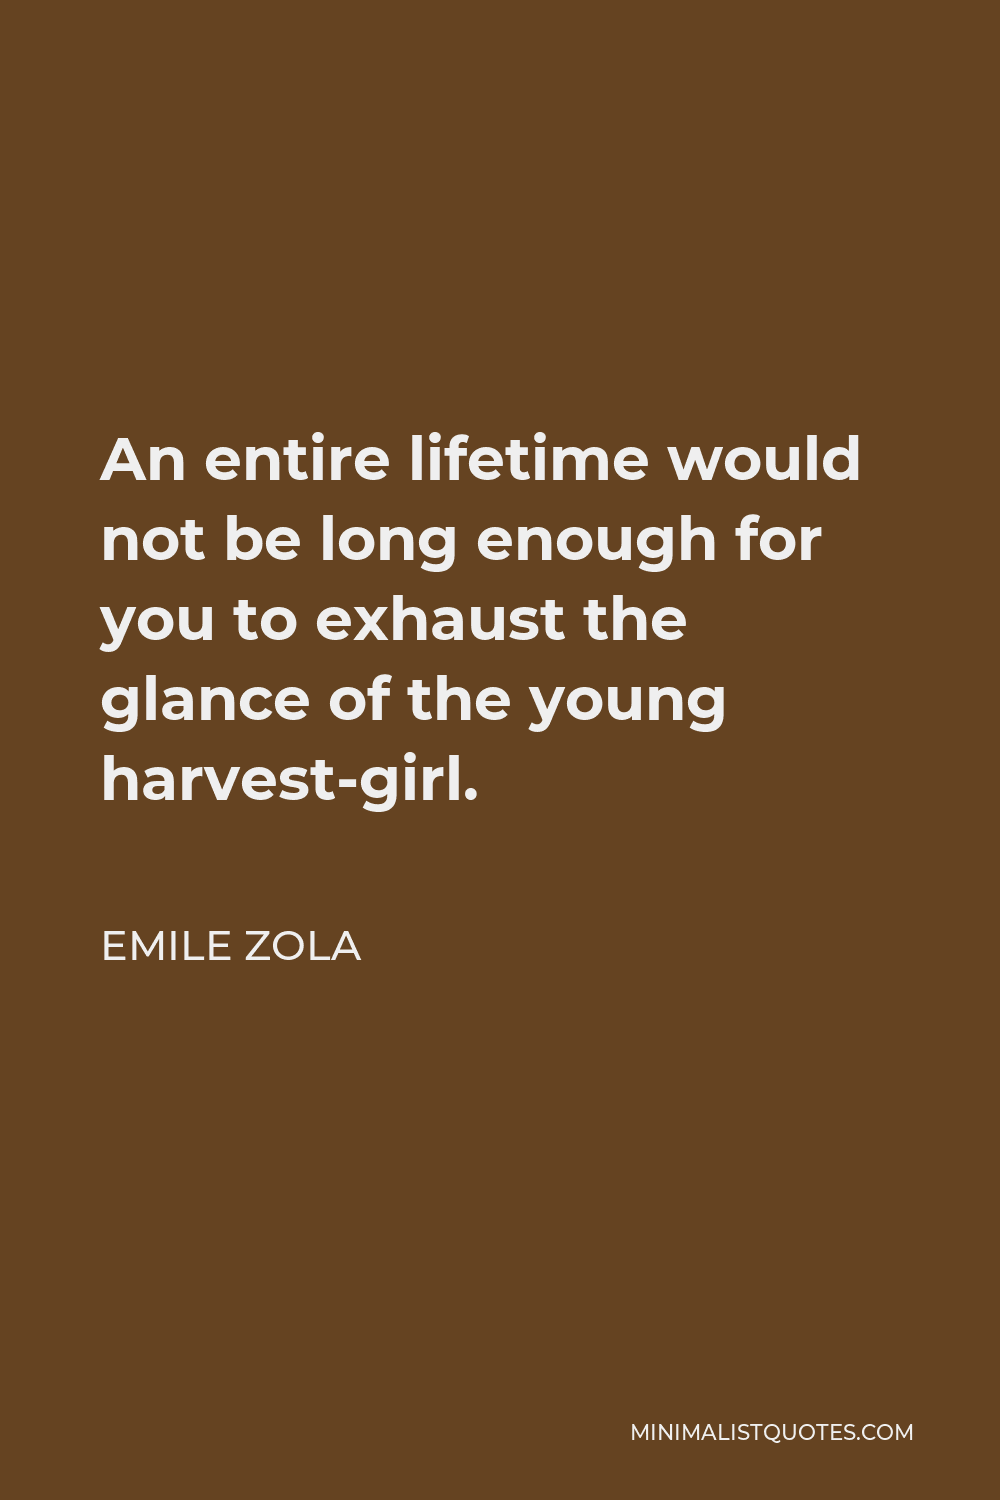 Emile Zola Quote - An entire lifetime would not be long enough for you to exhaust the glance of the young harvest-girl.